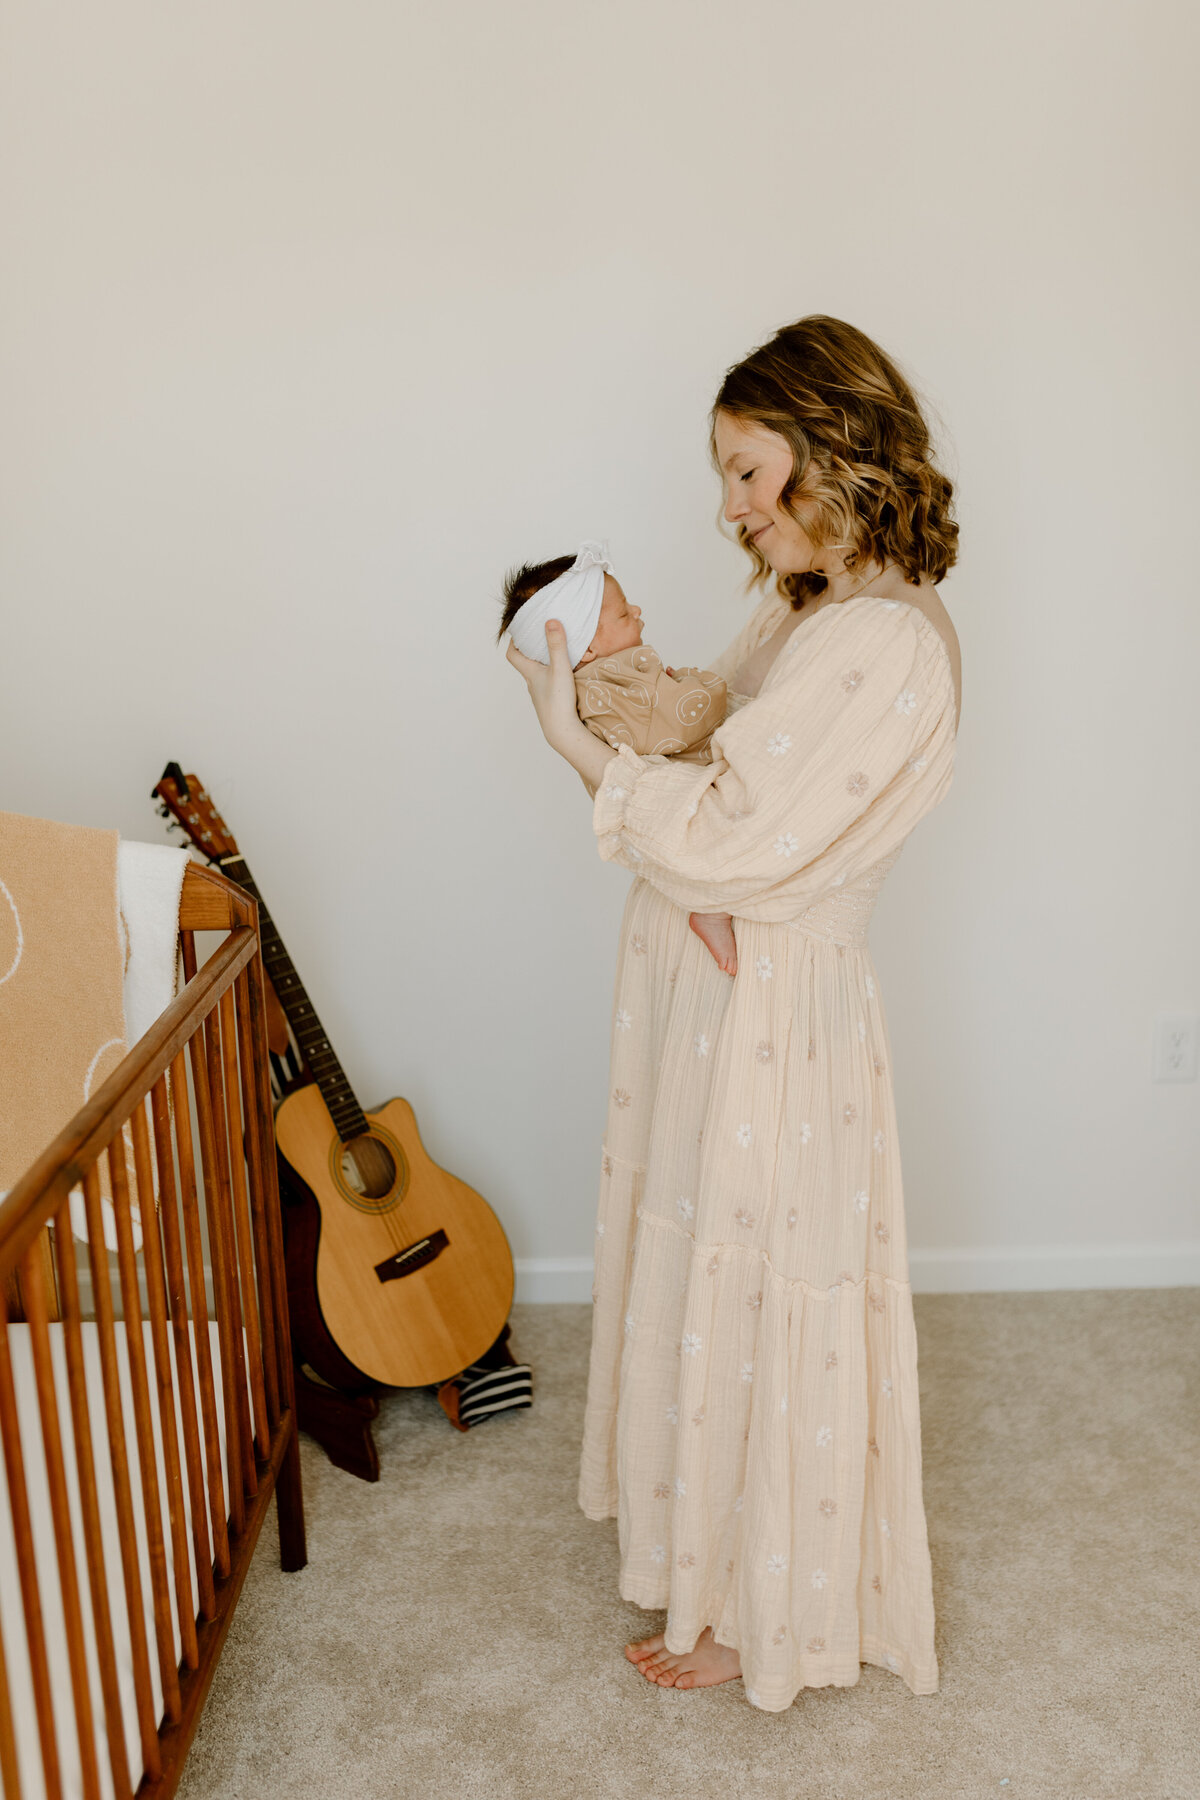 in-home-newborn-lifestyle-session-lancaster-pa-cara-marie-photography-26